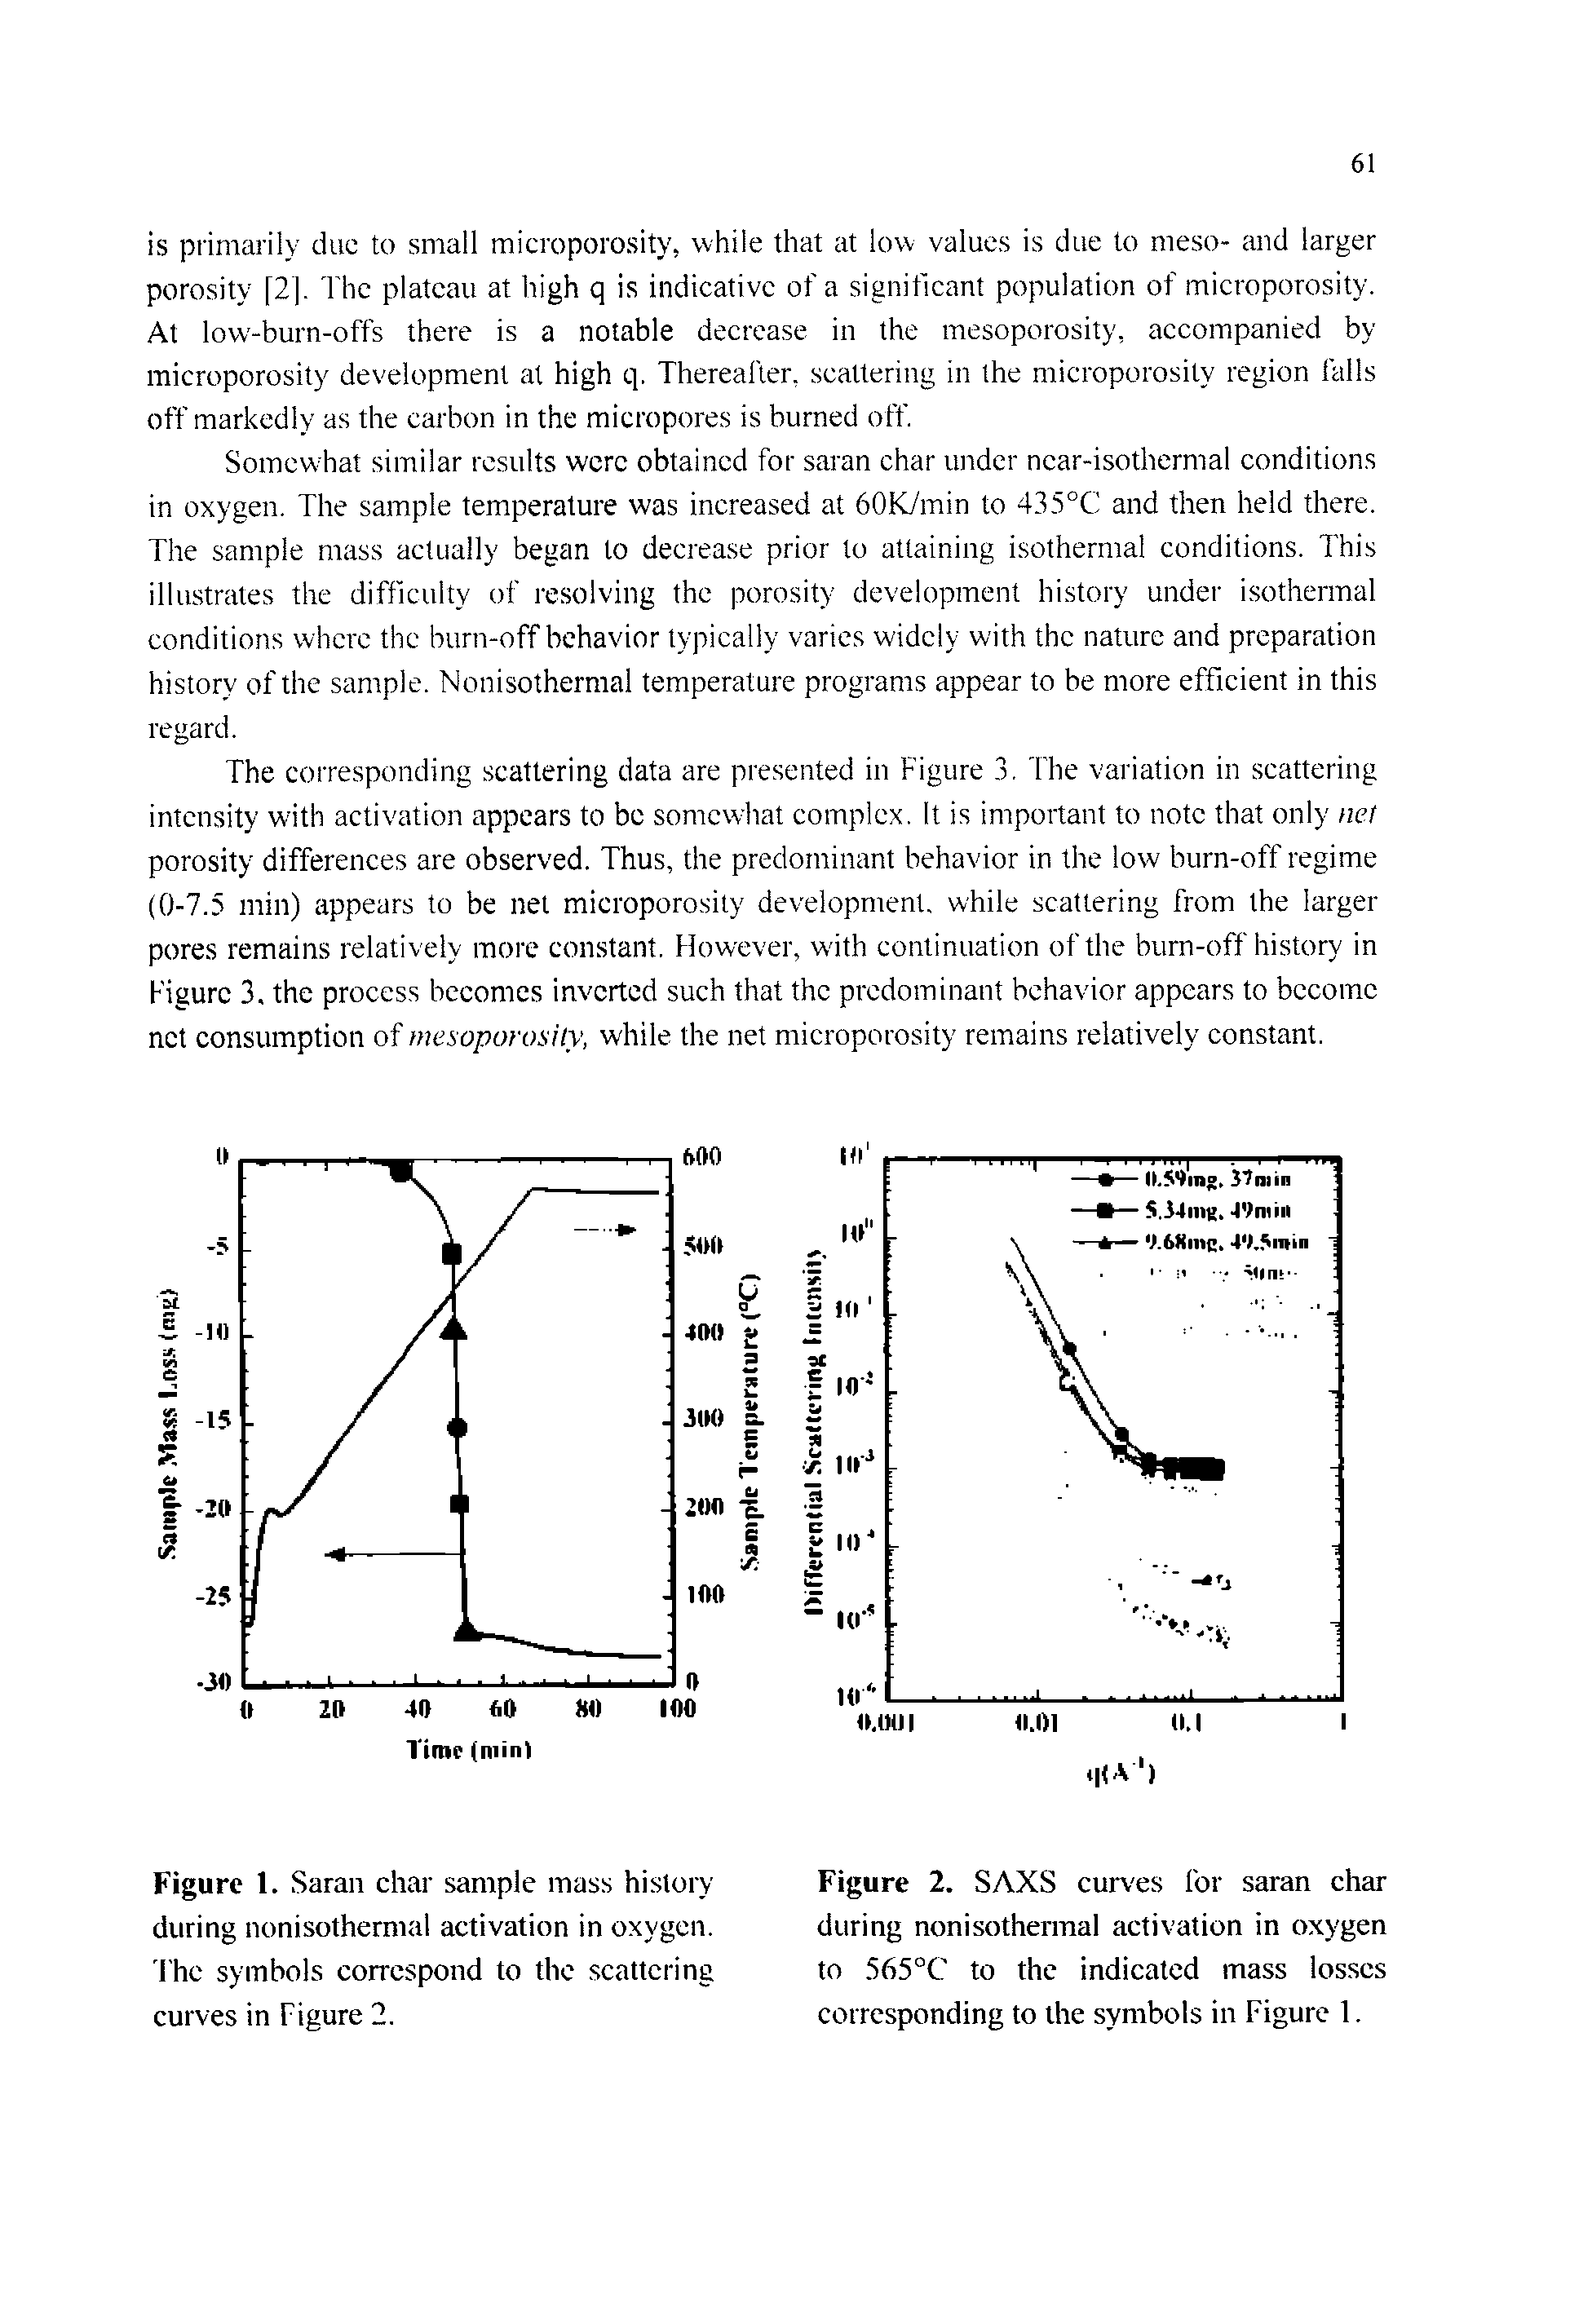 Figure 1. Saran char sample mass history during nonisothermal activation in oxygen. I hc symbols correspond to the scattering curves in Figure 2.